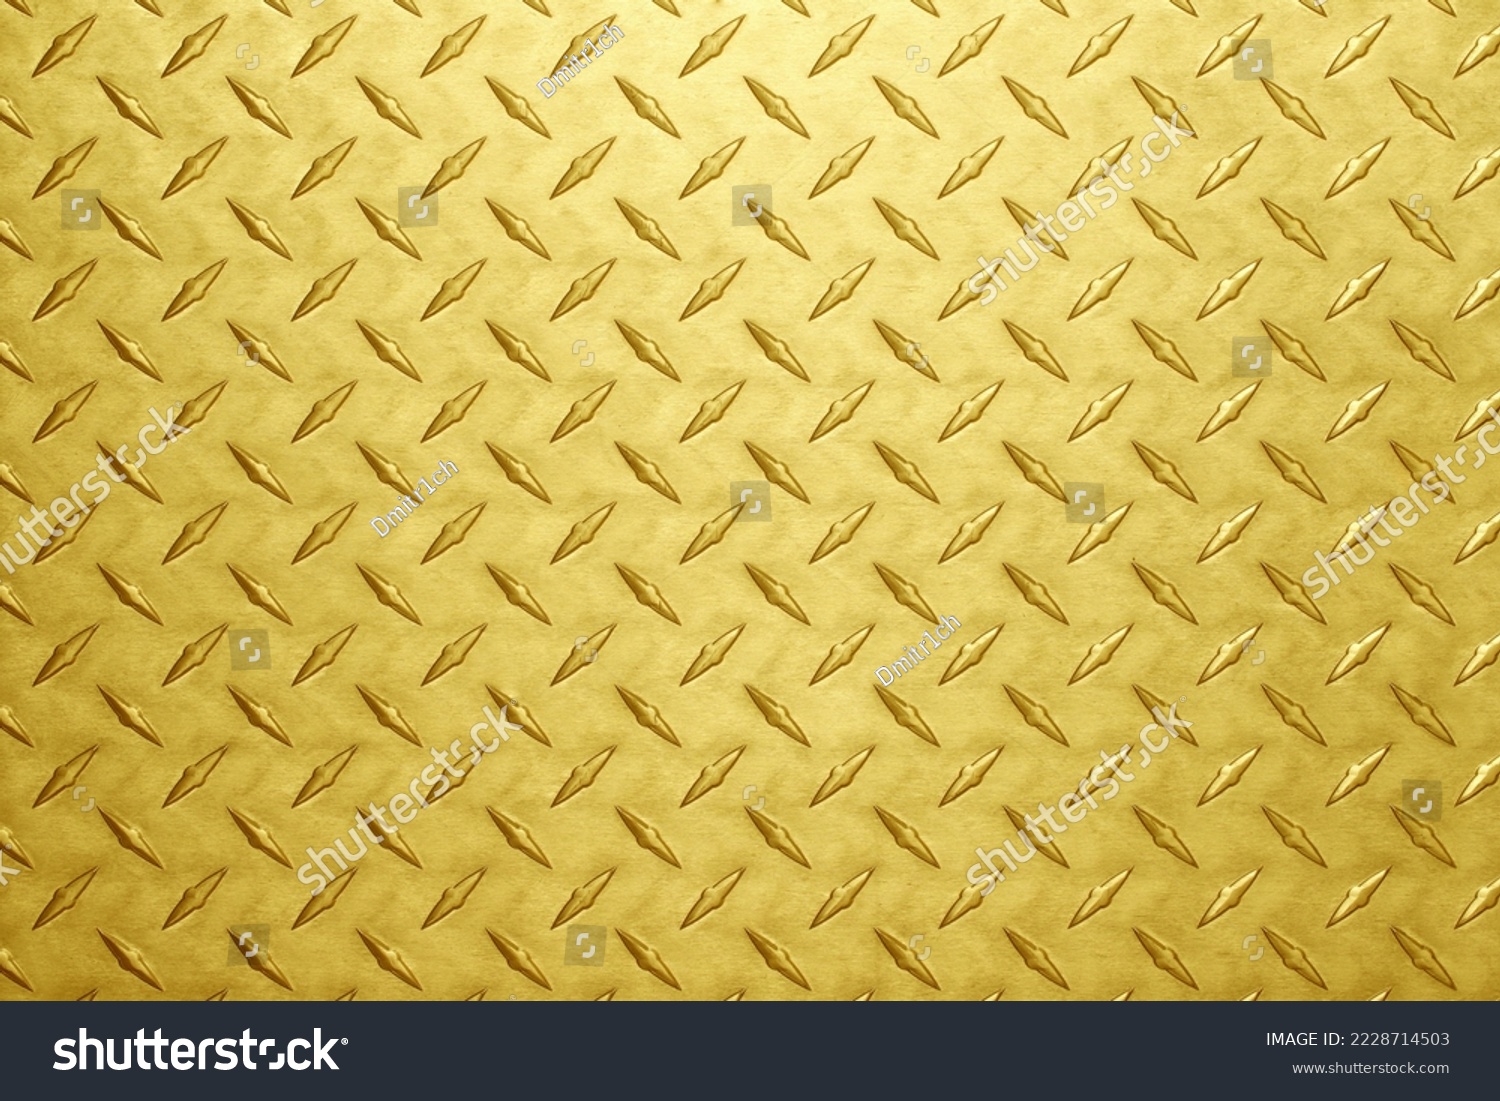 Gold texture with diamond pattern, bright metal background. #2228714503